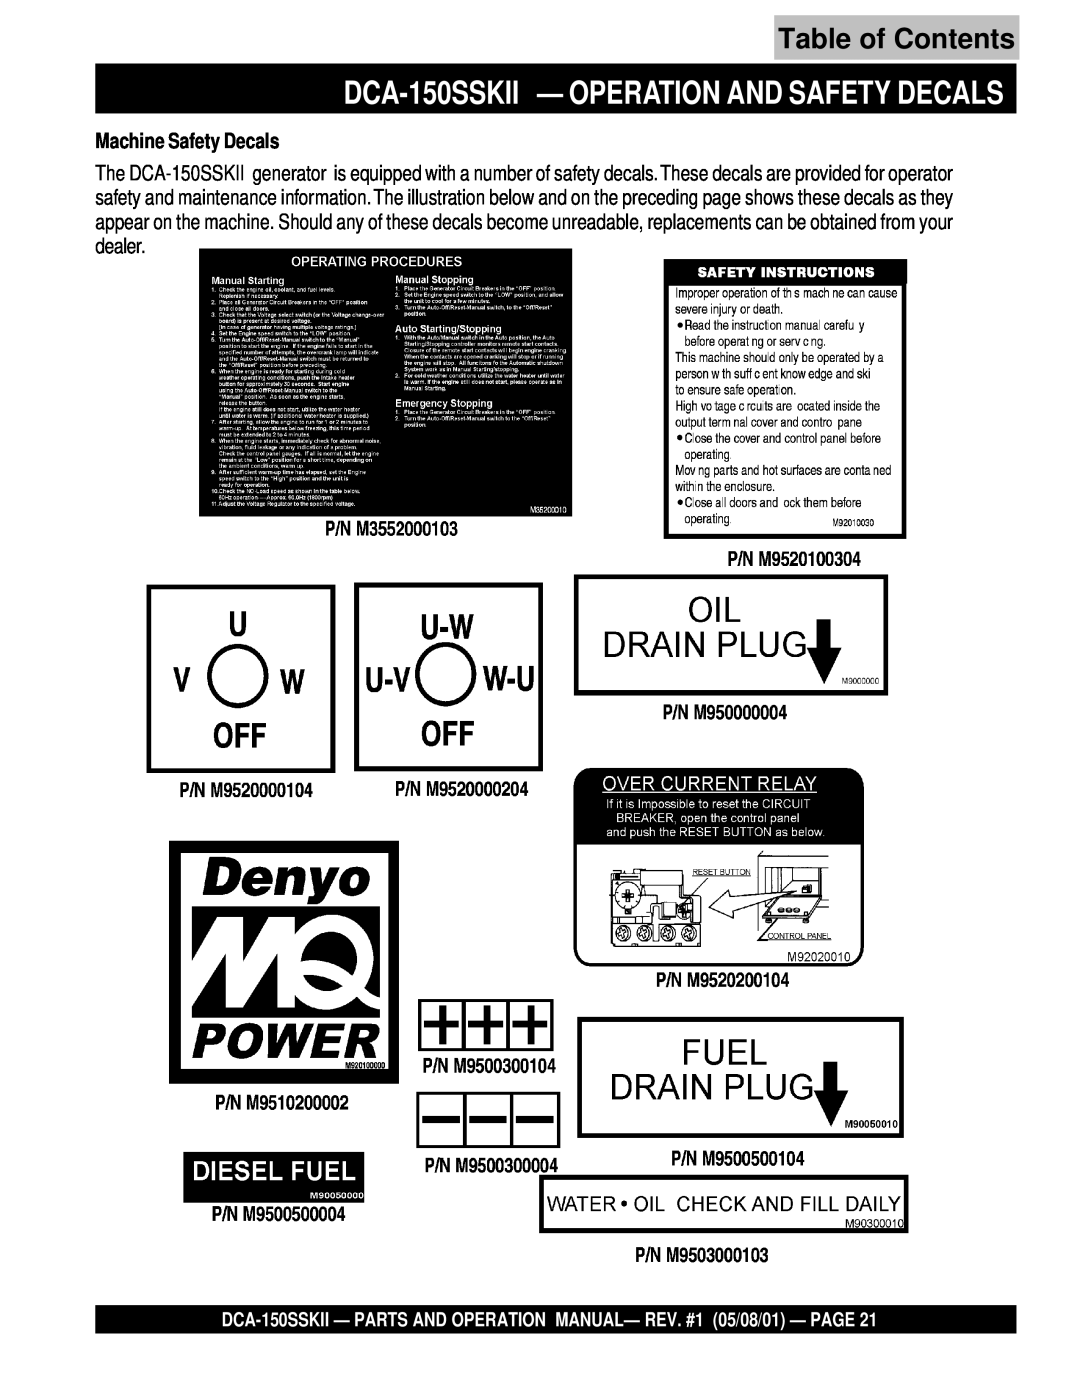 Multiquip operation manual DCA-150SSKII - OPERATION AND SAFETY DECALS, Machine Safety Decals, Table of Contents 